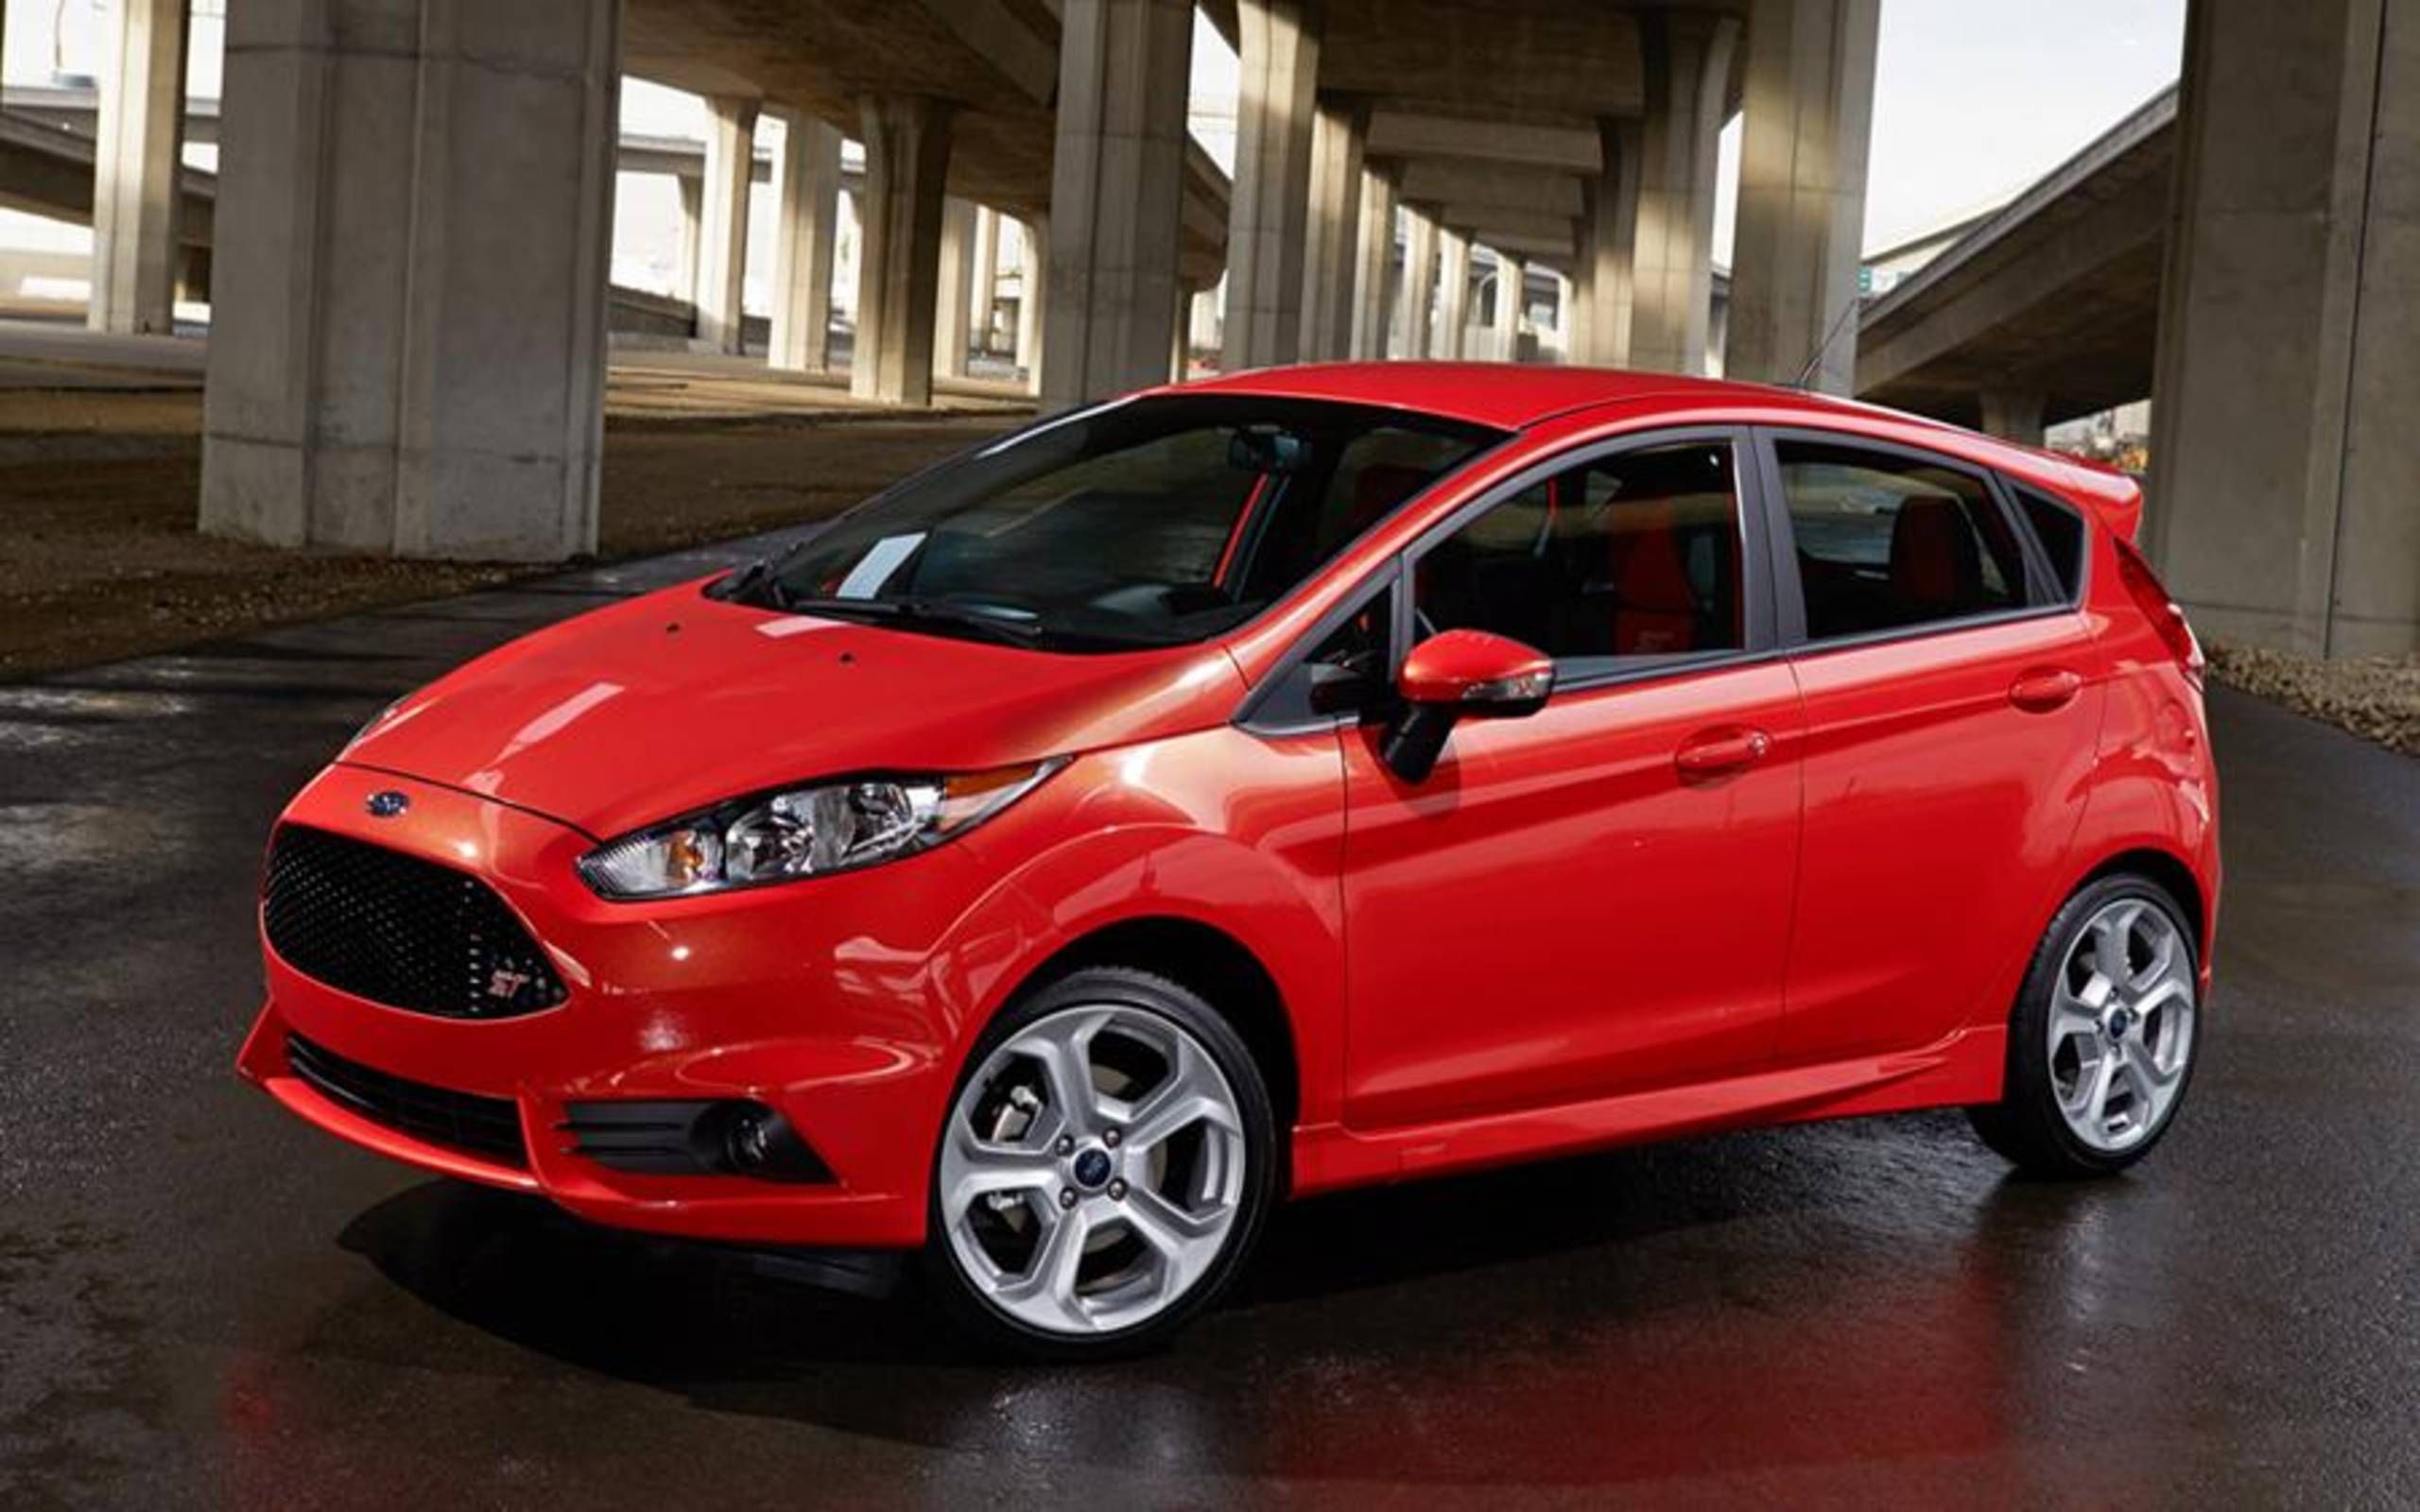 2014 Ford Fiesta ST drive review